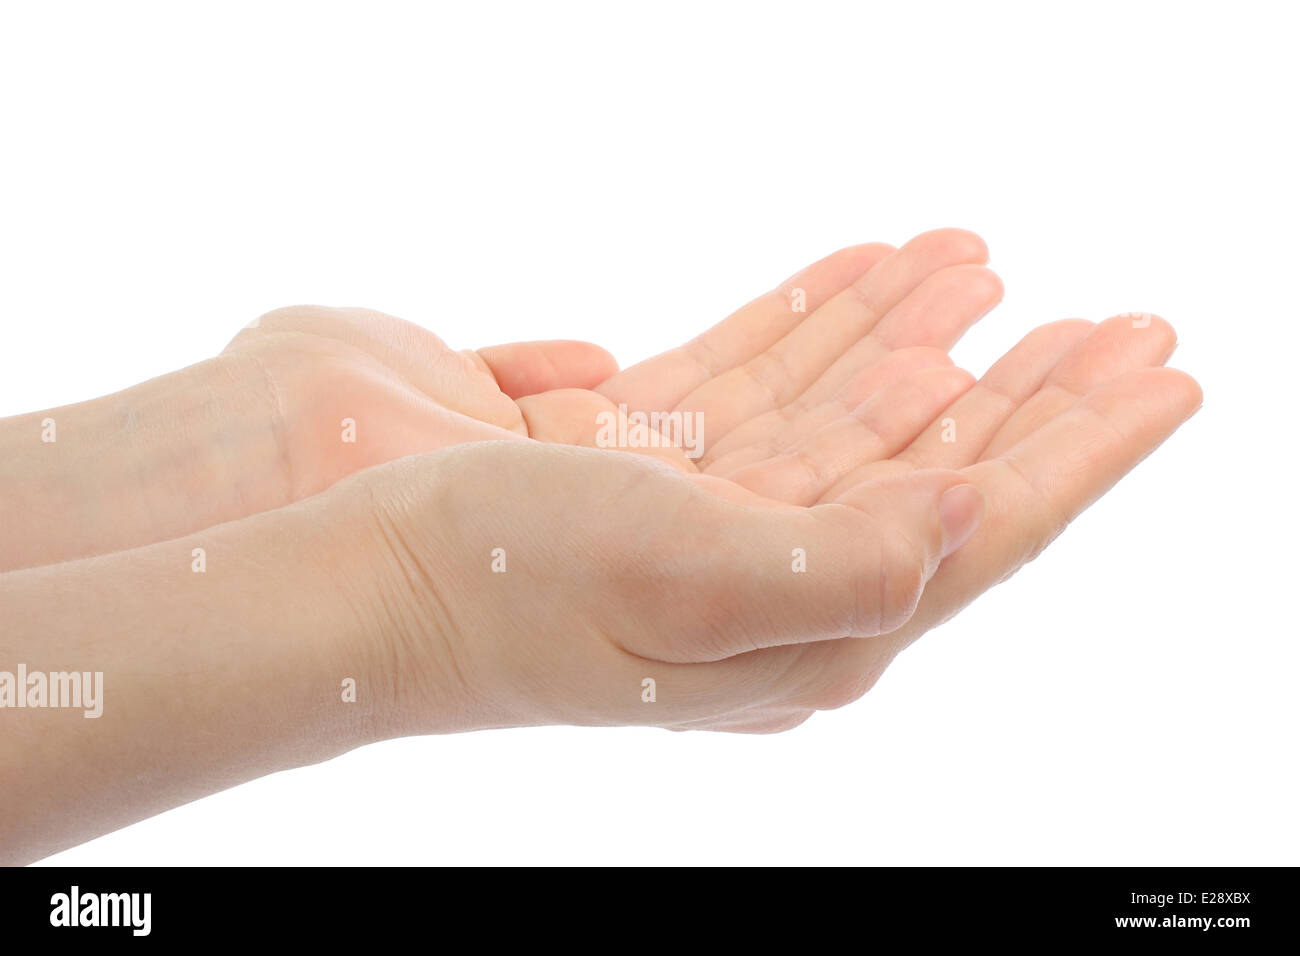 Woman hands on white background Stock Photo